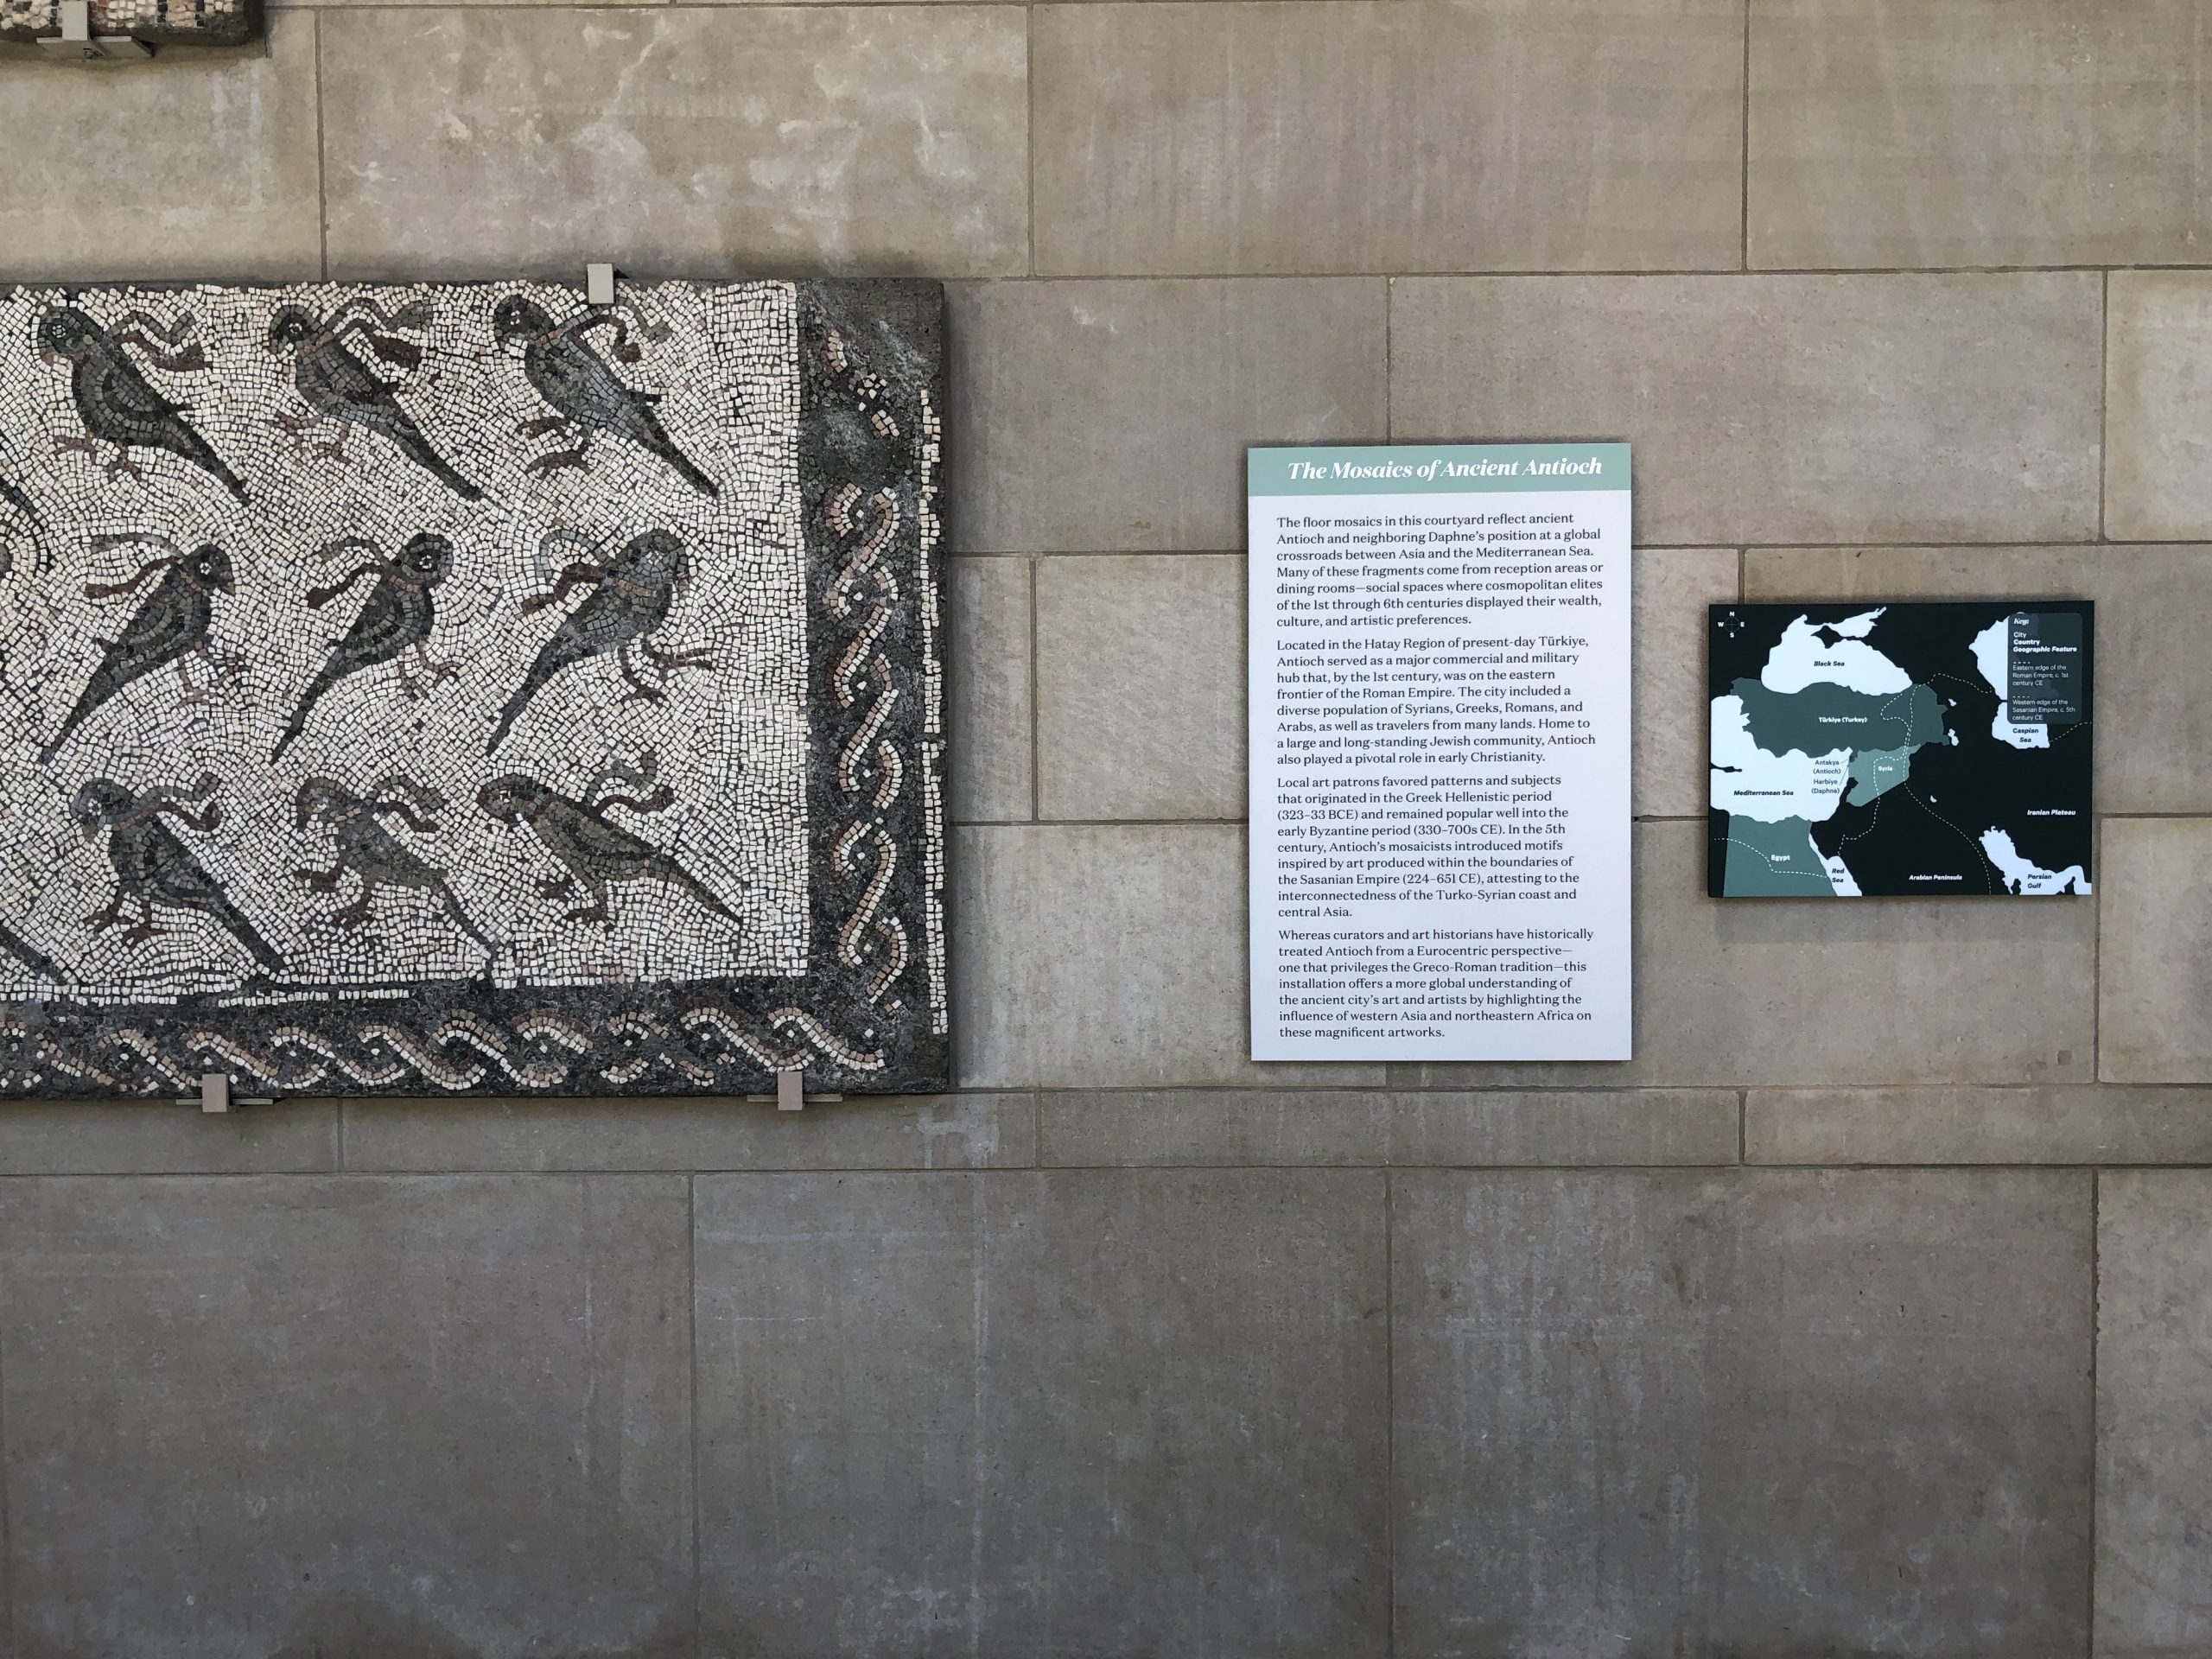 An ancient mosaic featuring birds in rows hangs on a museum wall. The museum's introductory label appears to the right of the image.